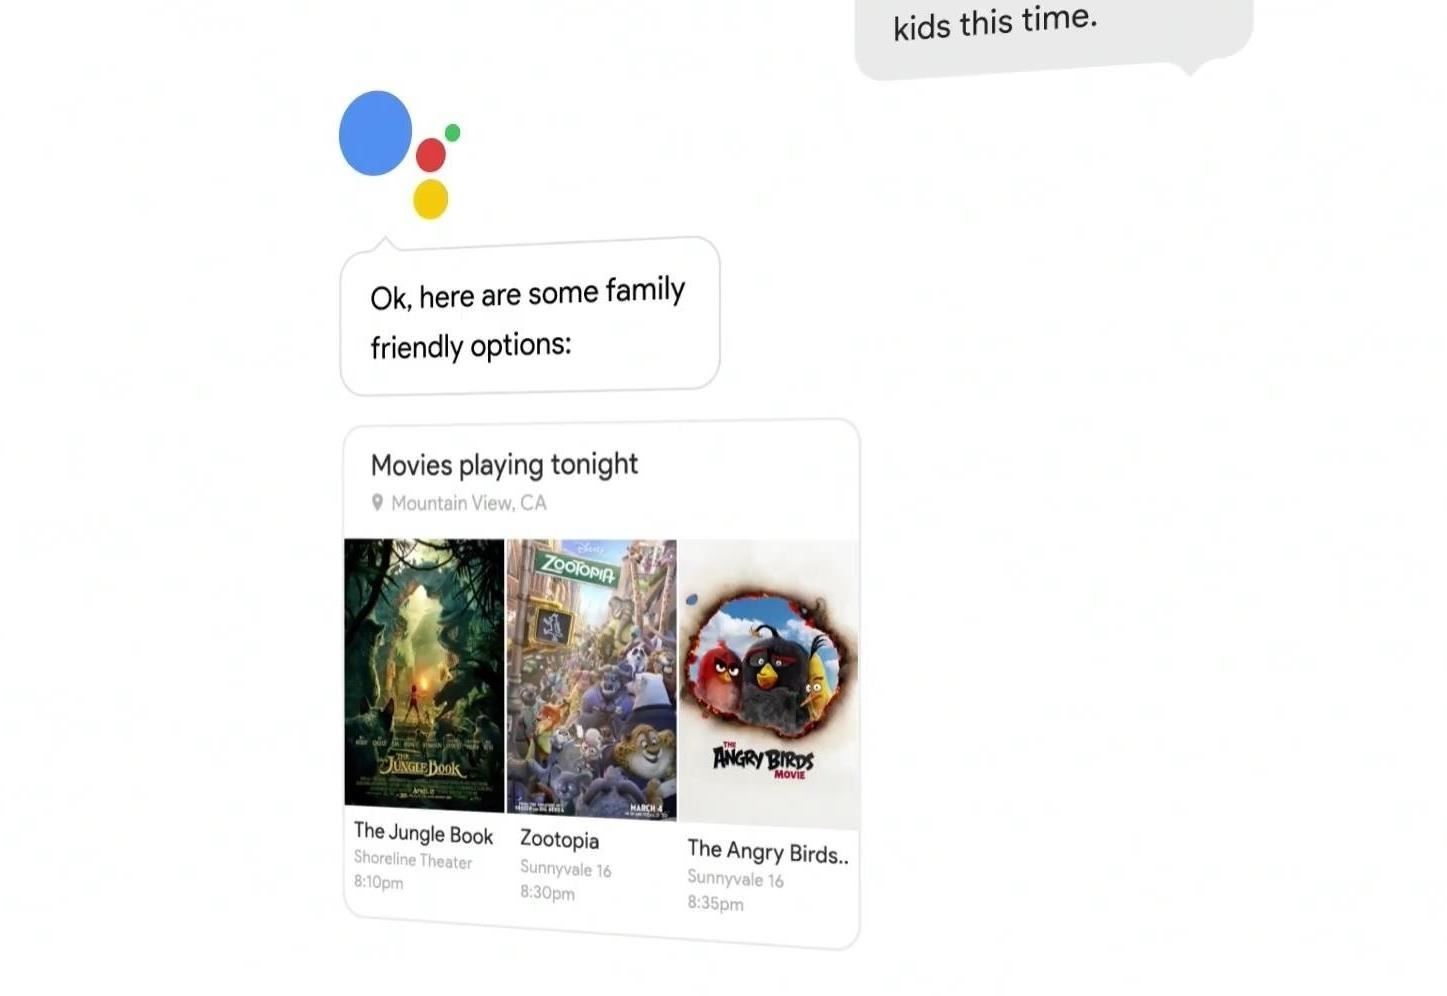 Google's New Assistant Lets You Have Conversations with the Internet